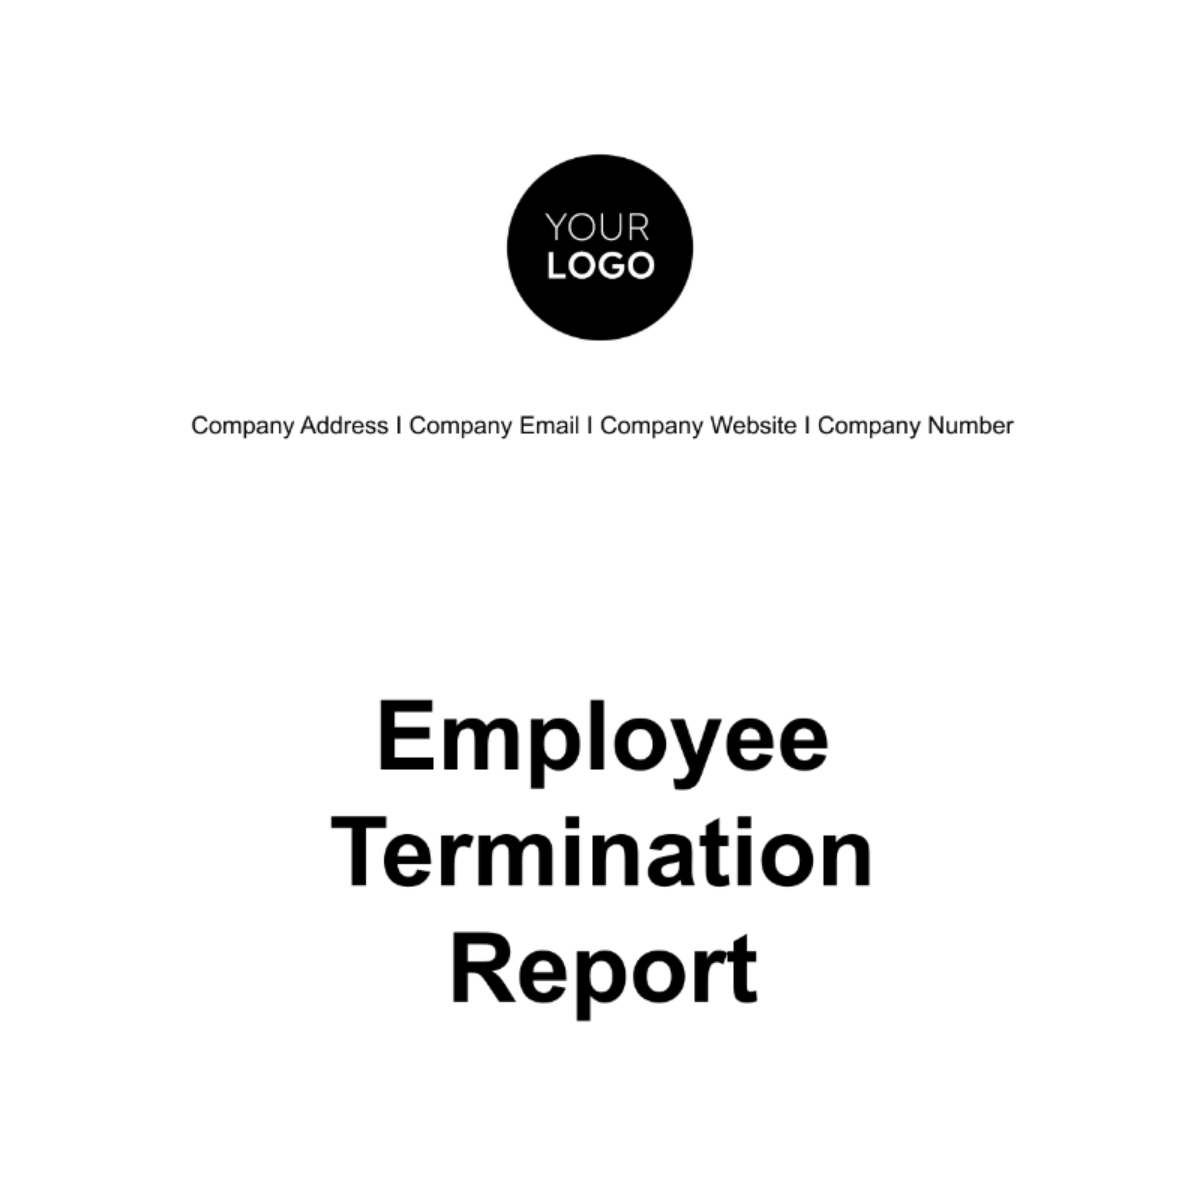 Free Employee Termination Report HR Template